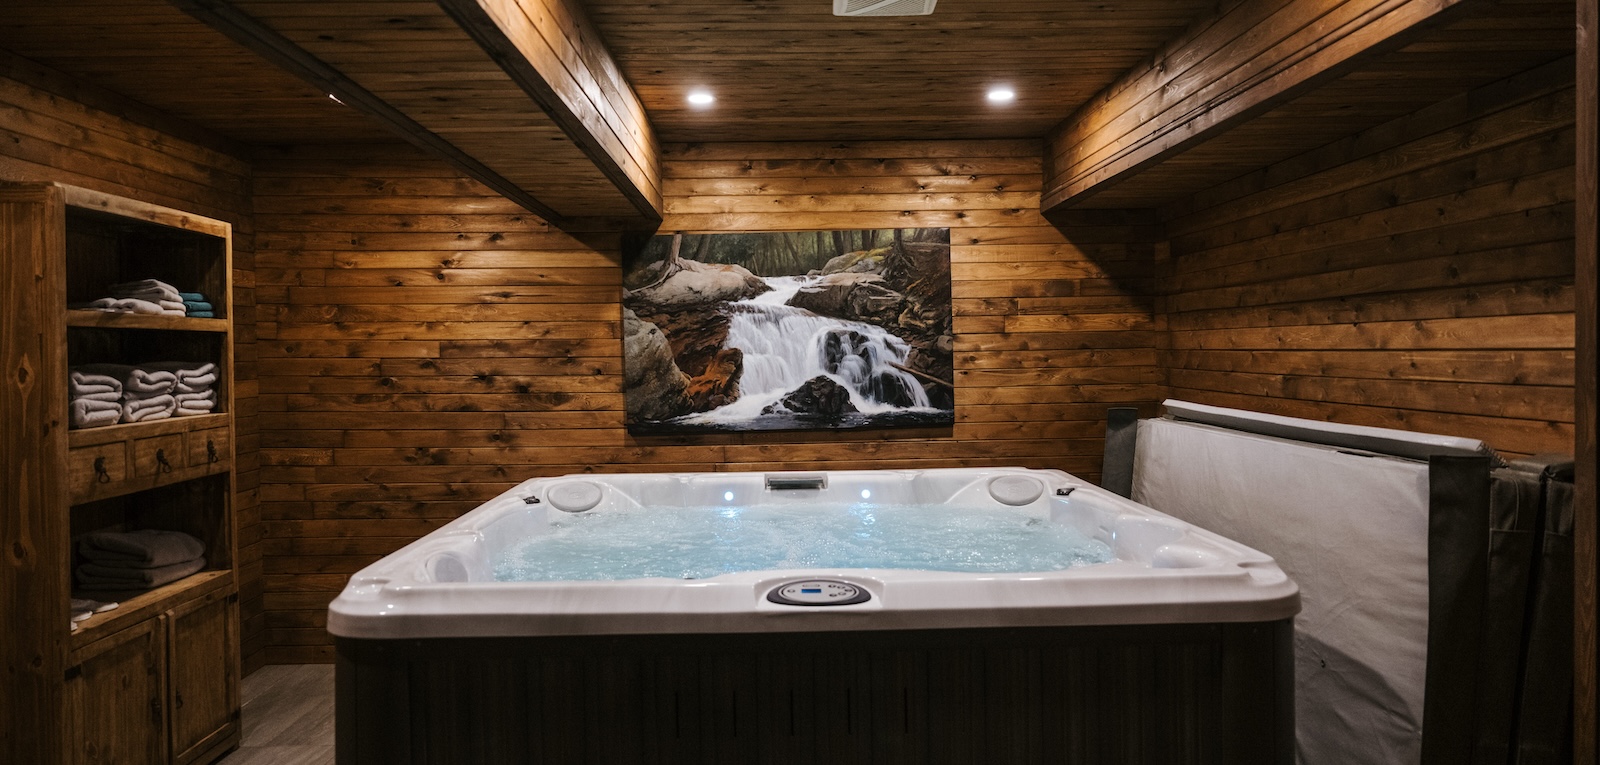 Relaxation - Private hot tub